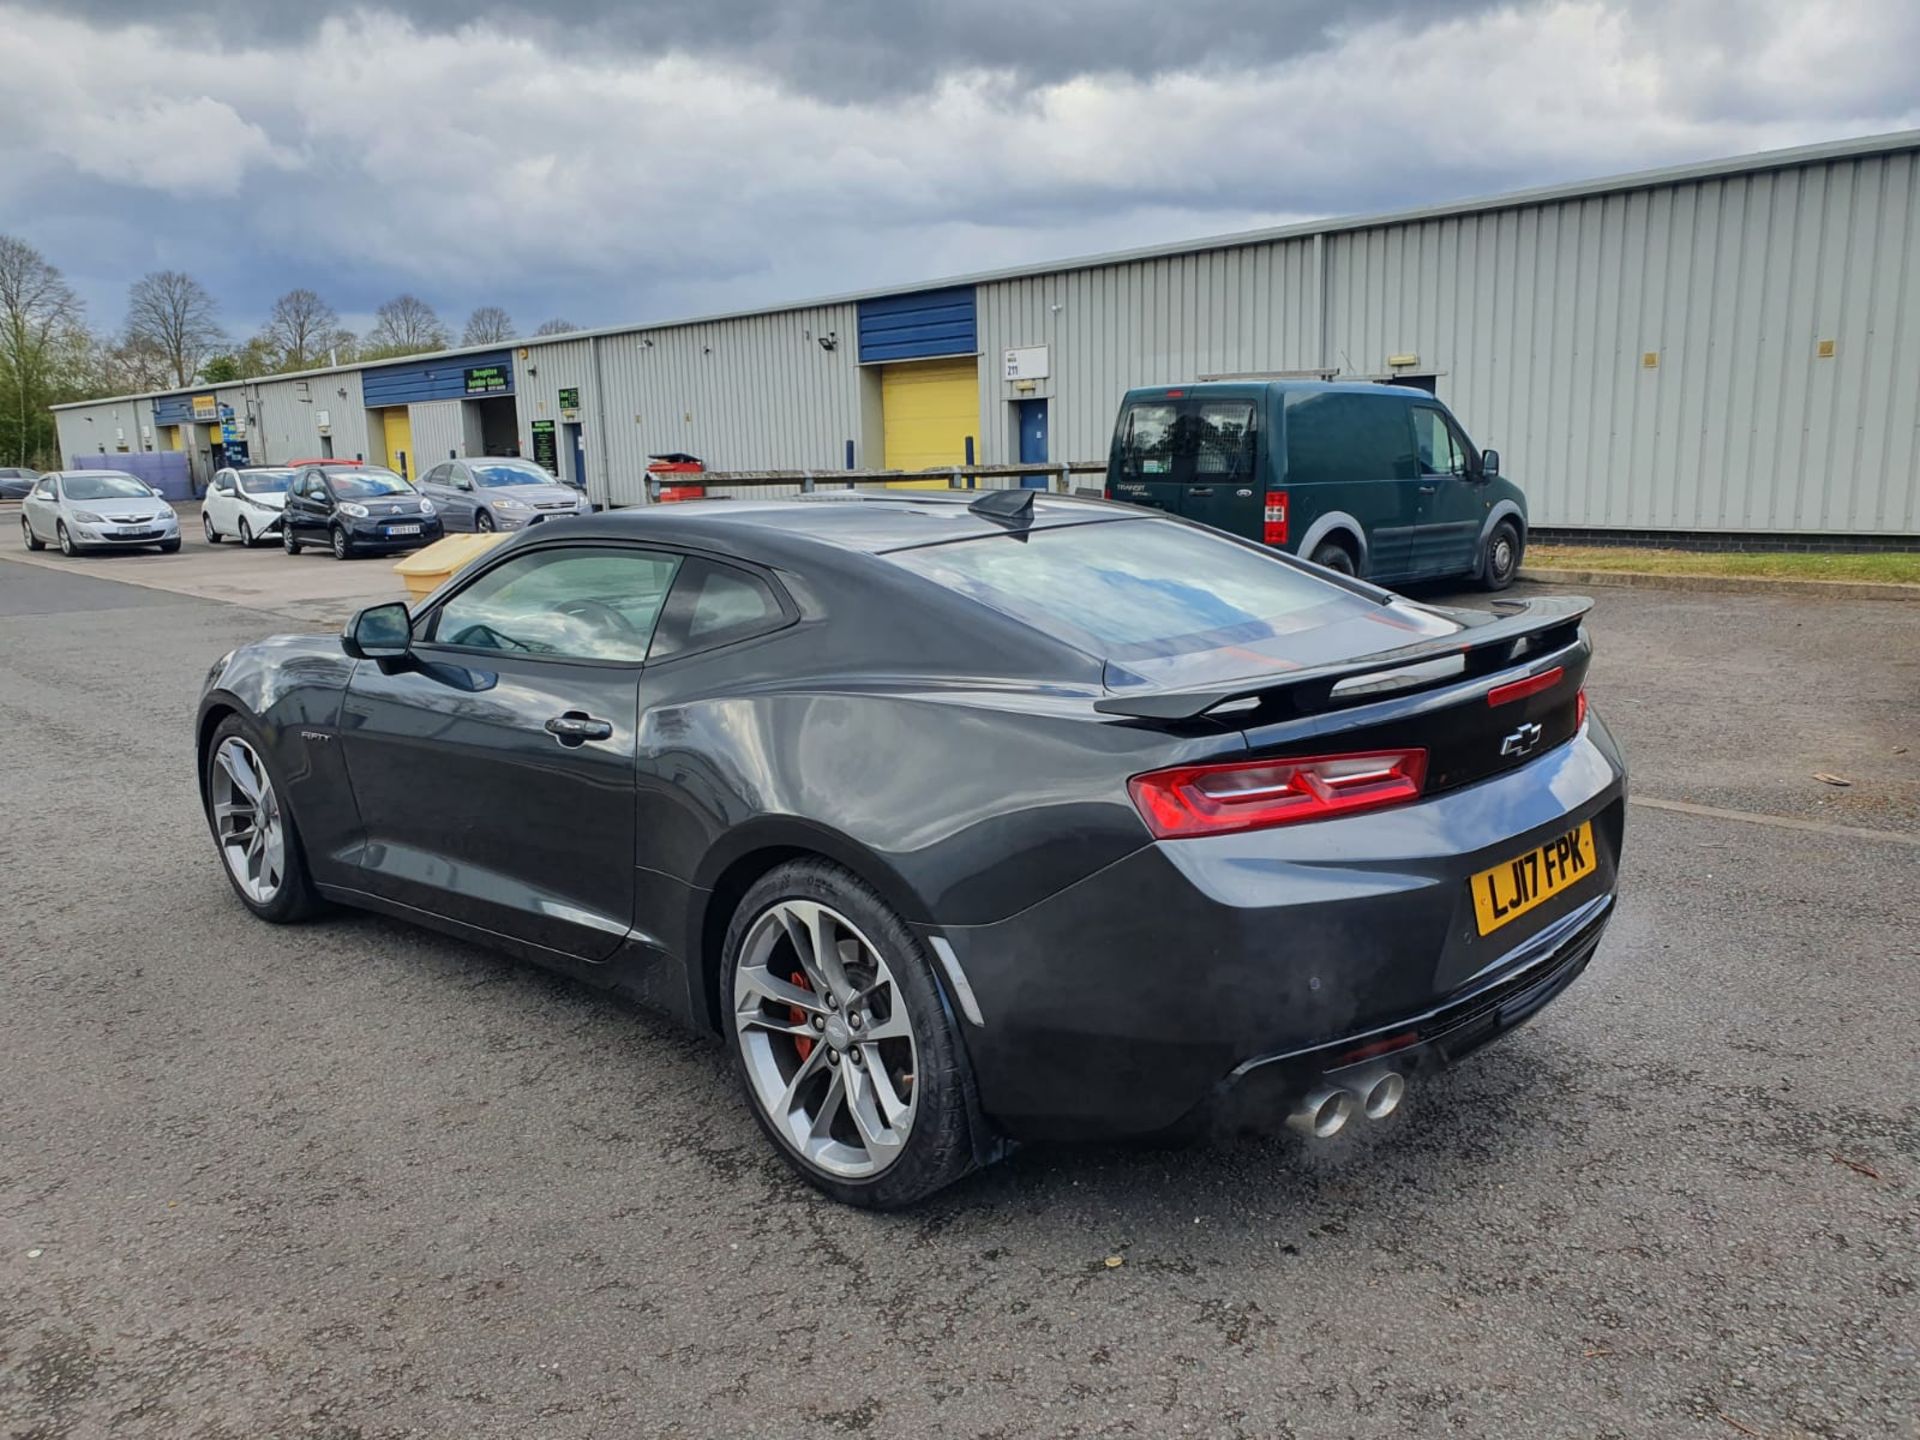 2017/17 REG CHEVROLET CAMARO V8 AUTOMATIC GREY COUPE 50th ANNIVERSARY EDITION, LHD, LOW MILEAGE - Image 7 of 43